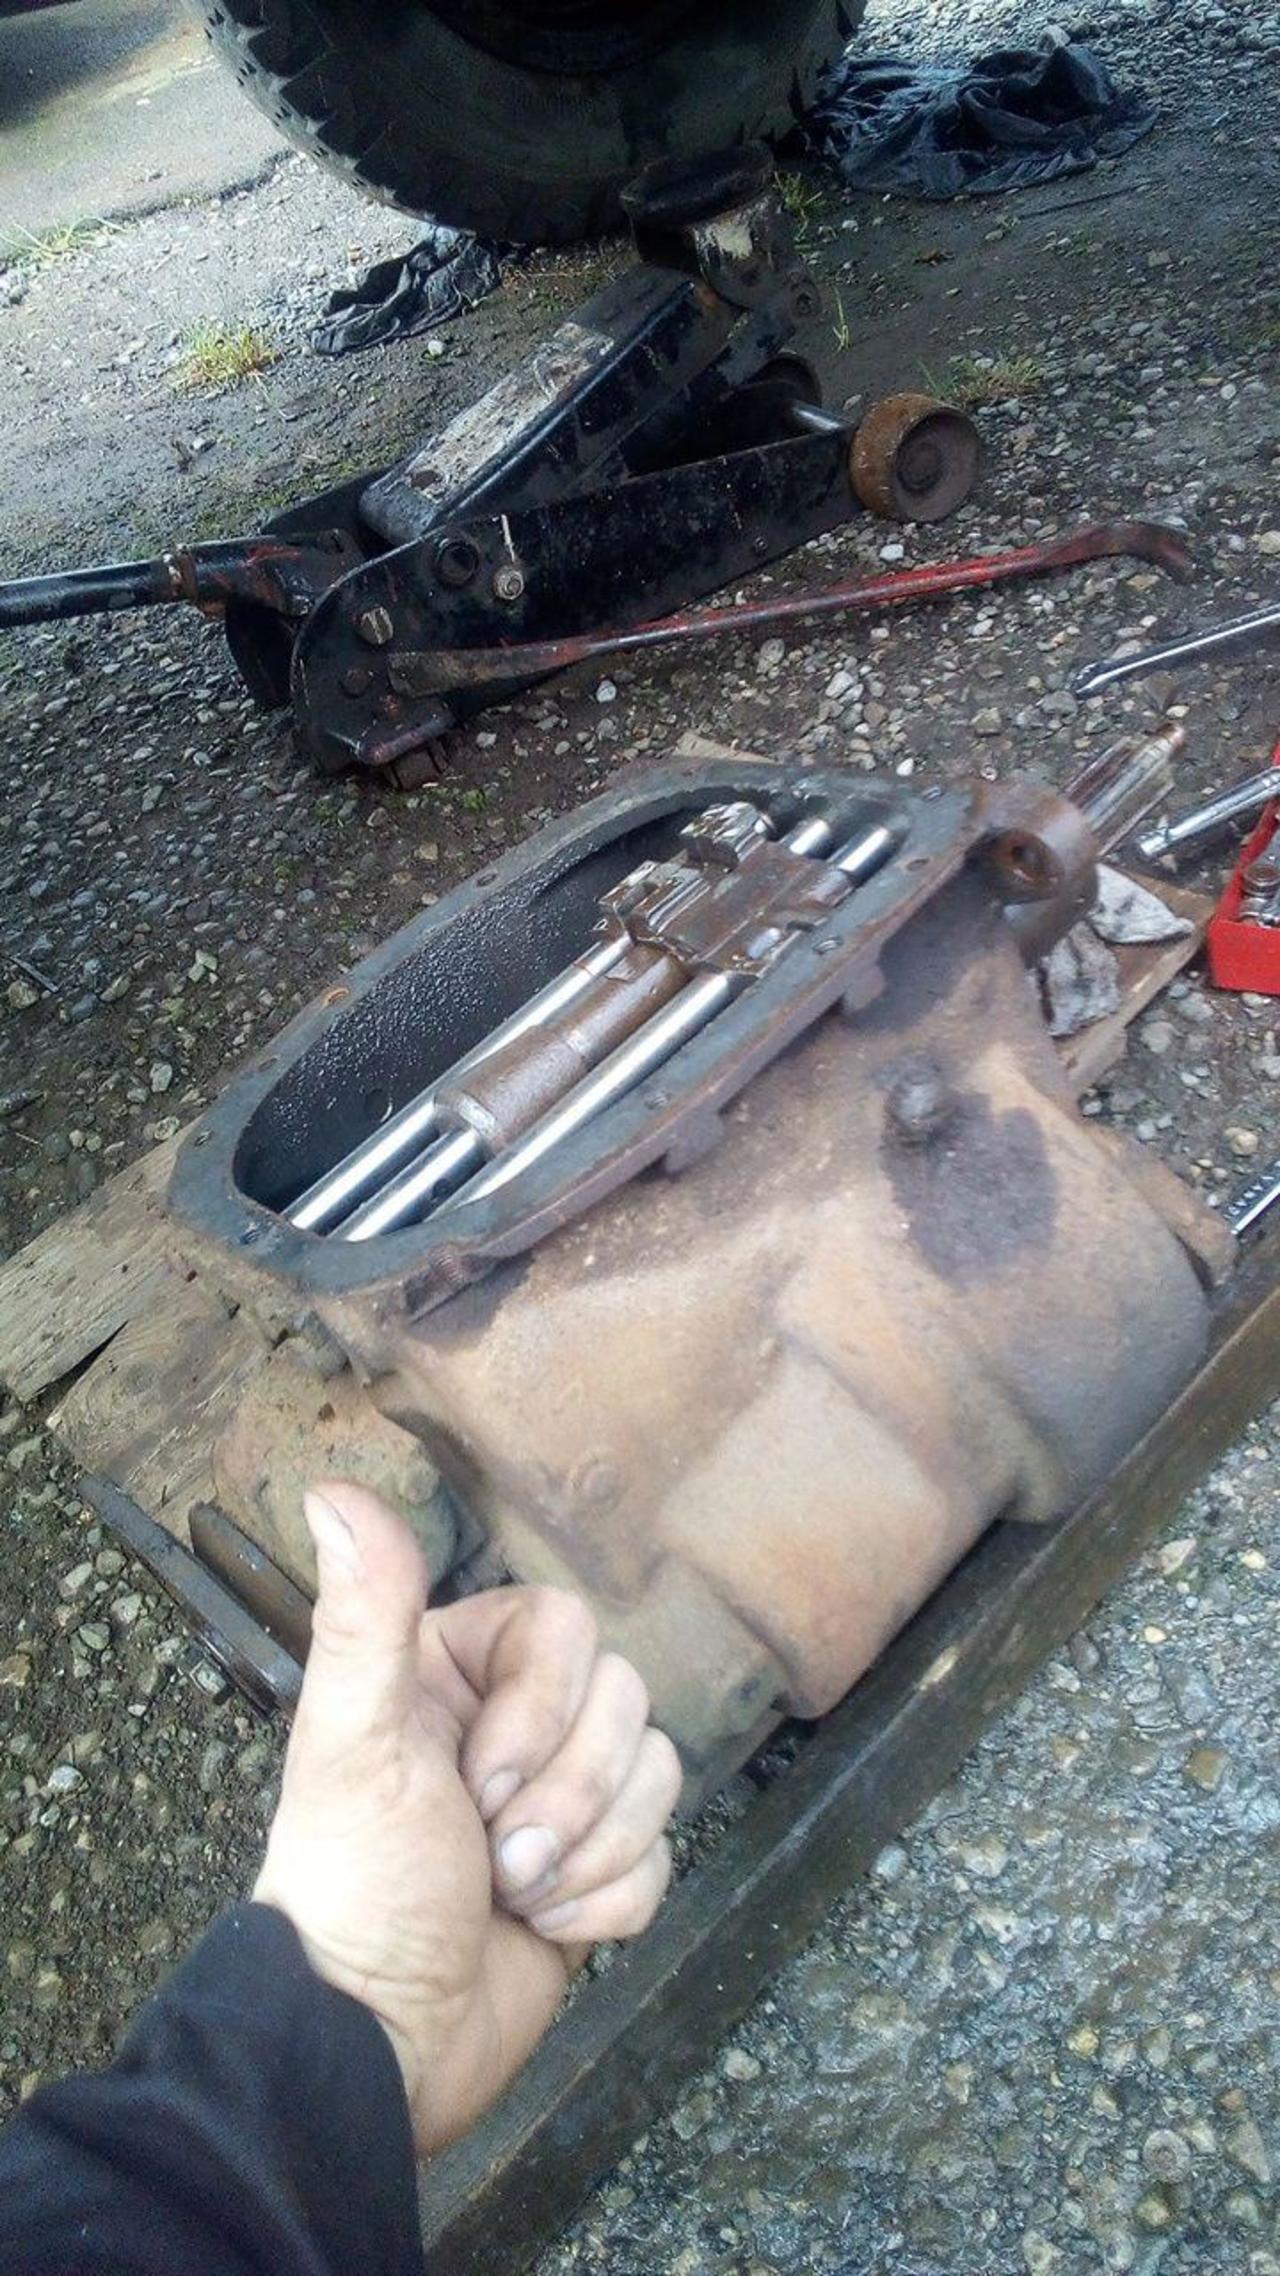 The gearbox, with its top removed, sitting on the floor in the
yard. A dirty hand gives a thumbs-up in front of it.